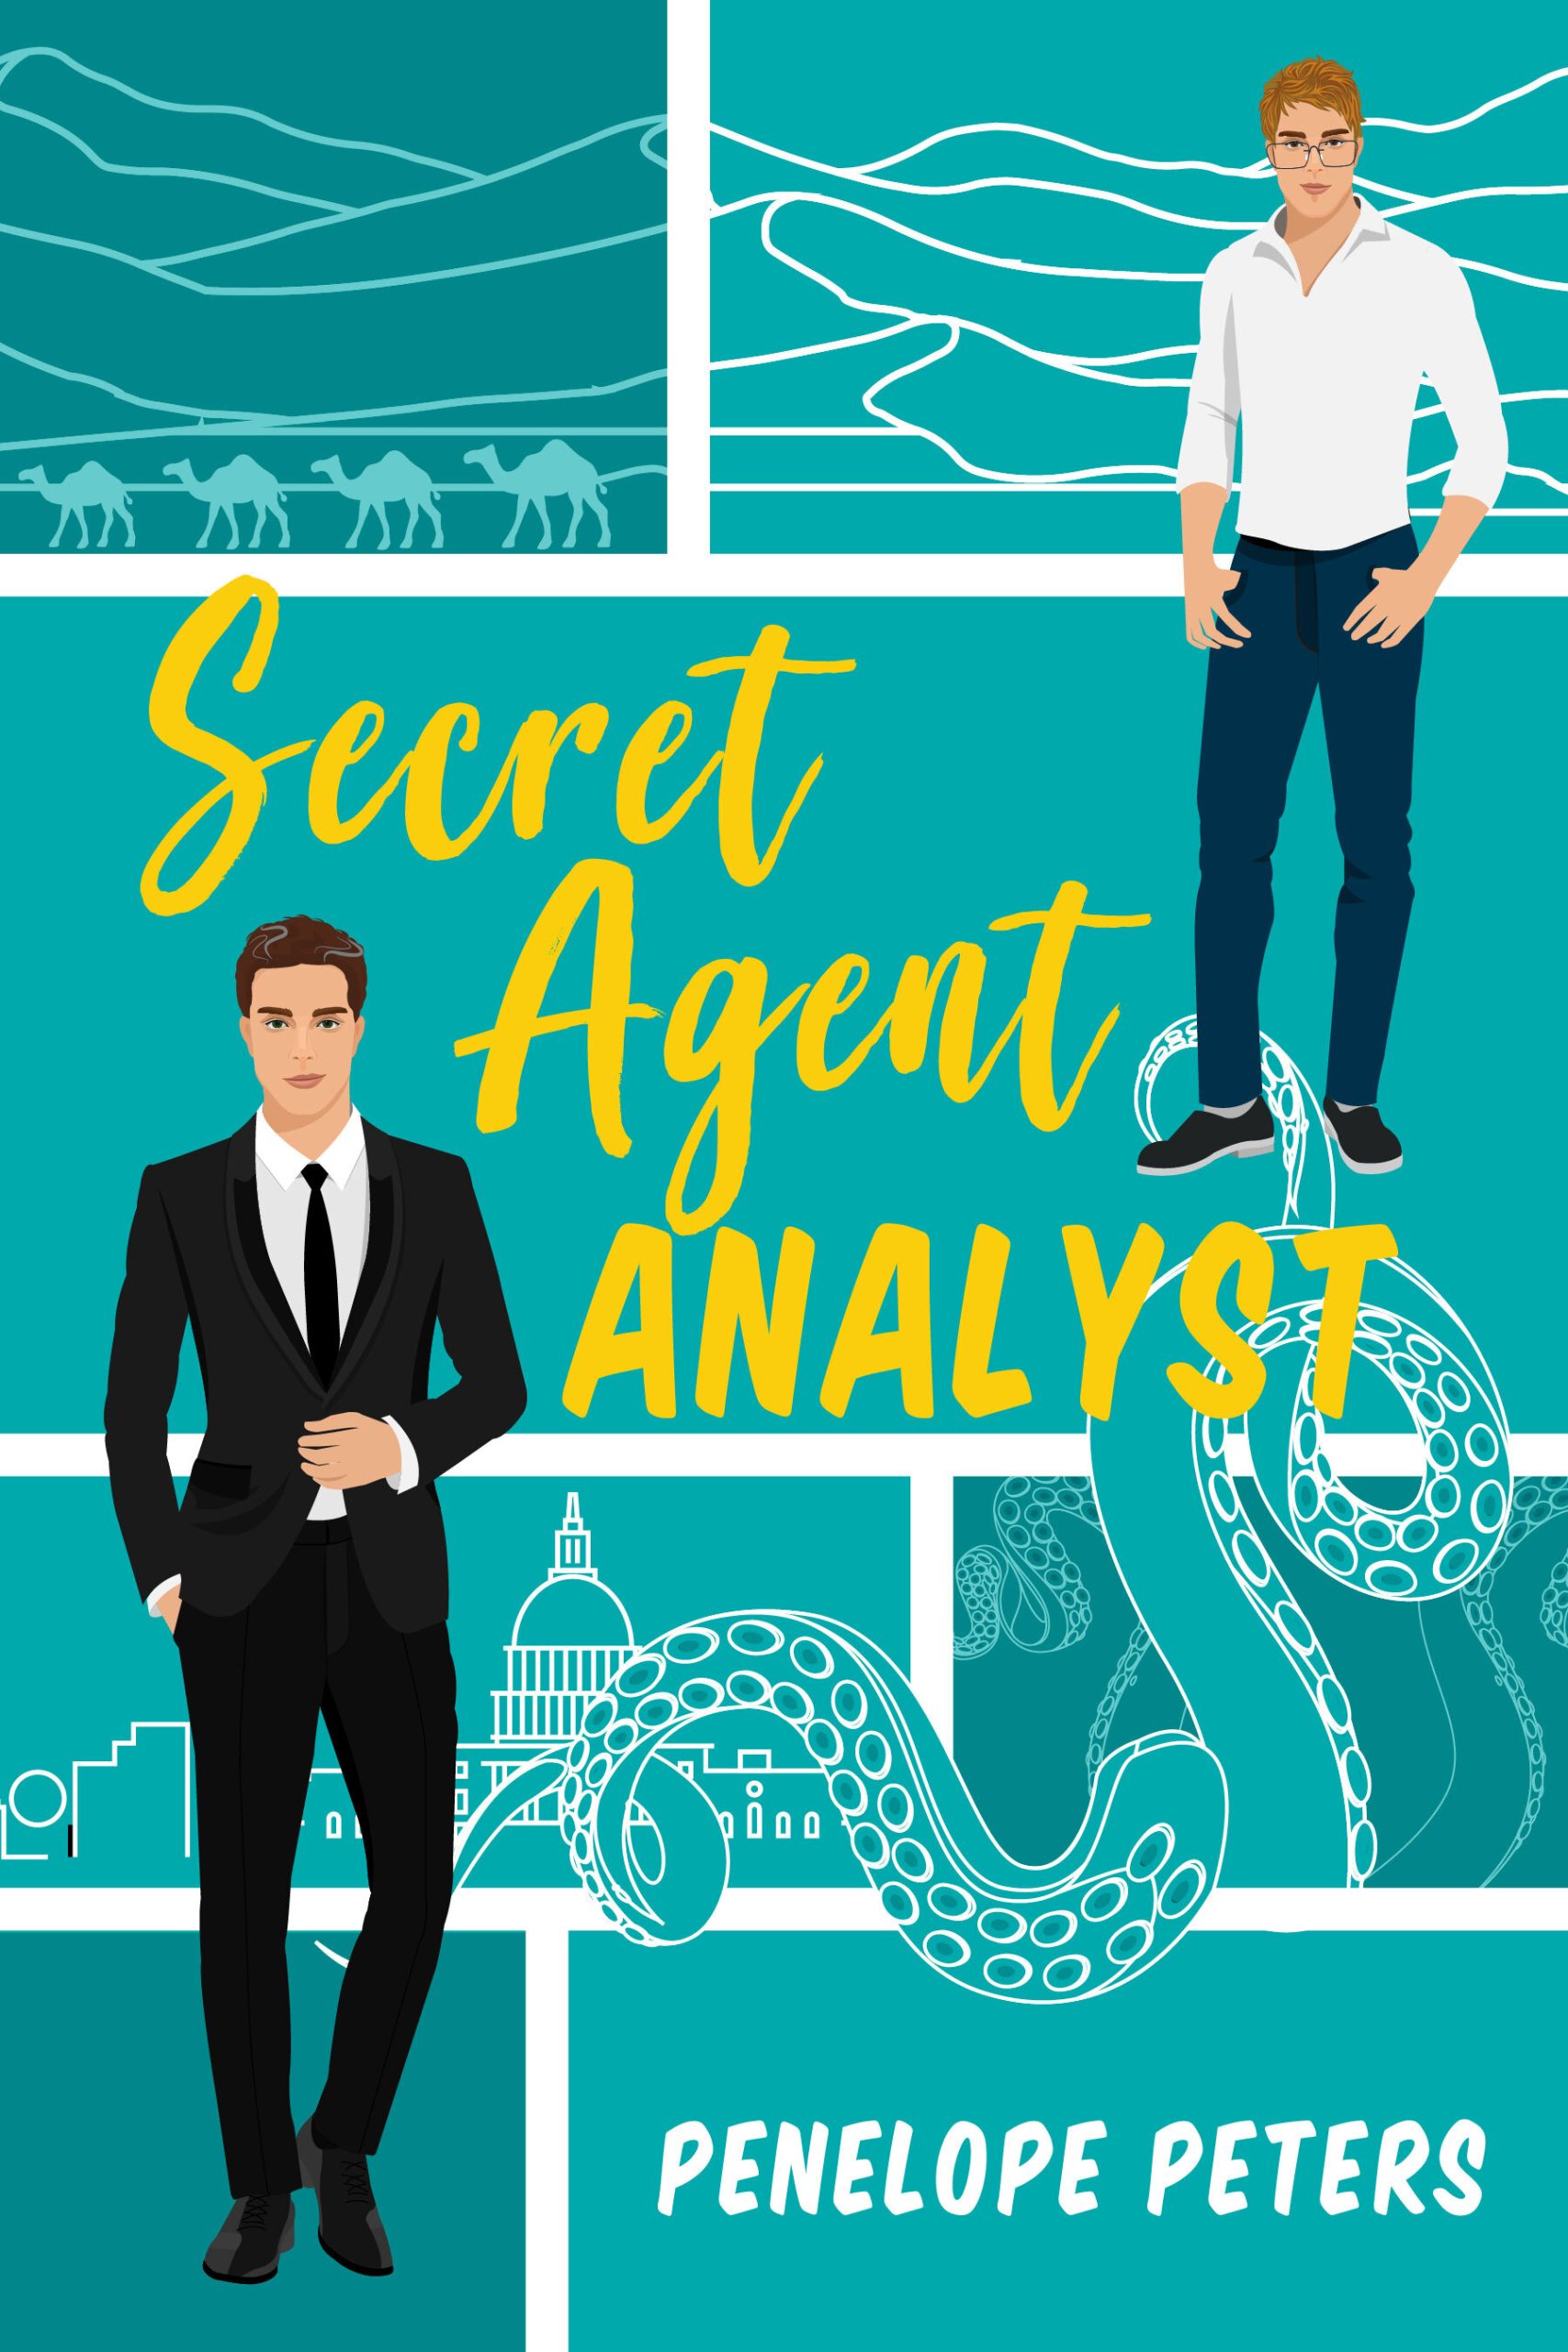 Secret Agent Analyst by Penelope Peters PDF Download